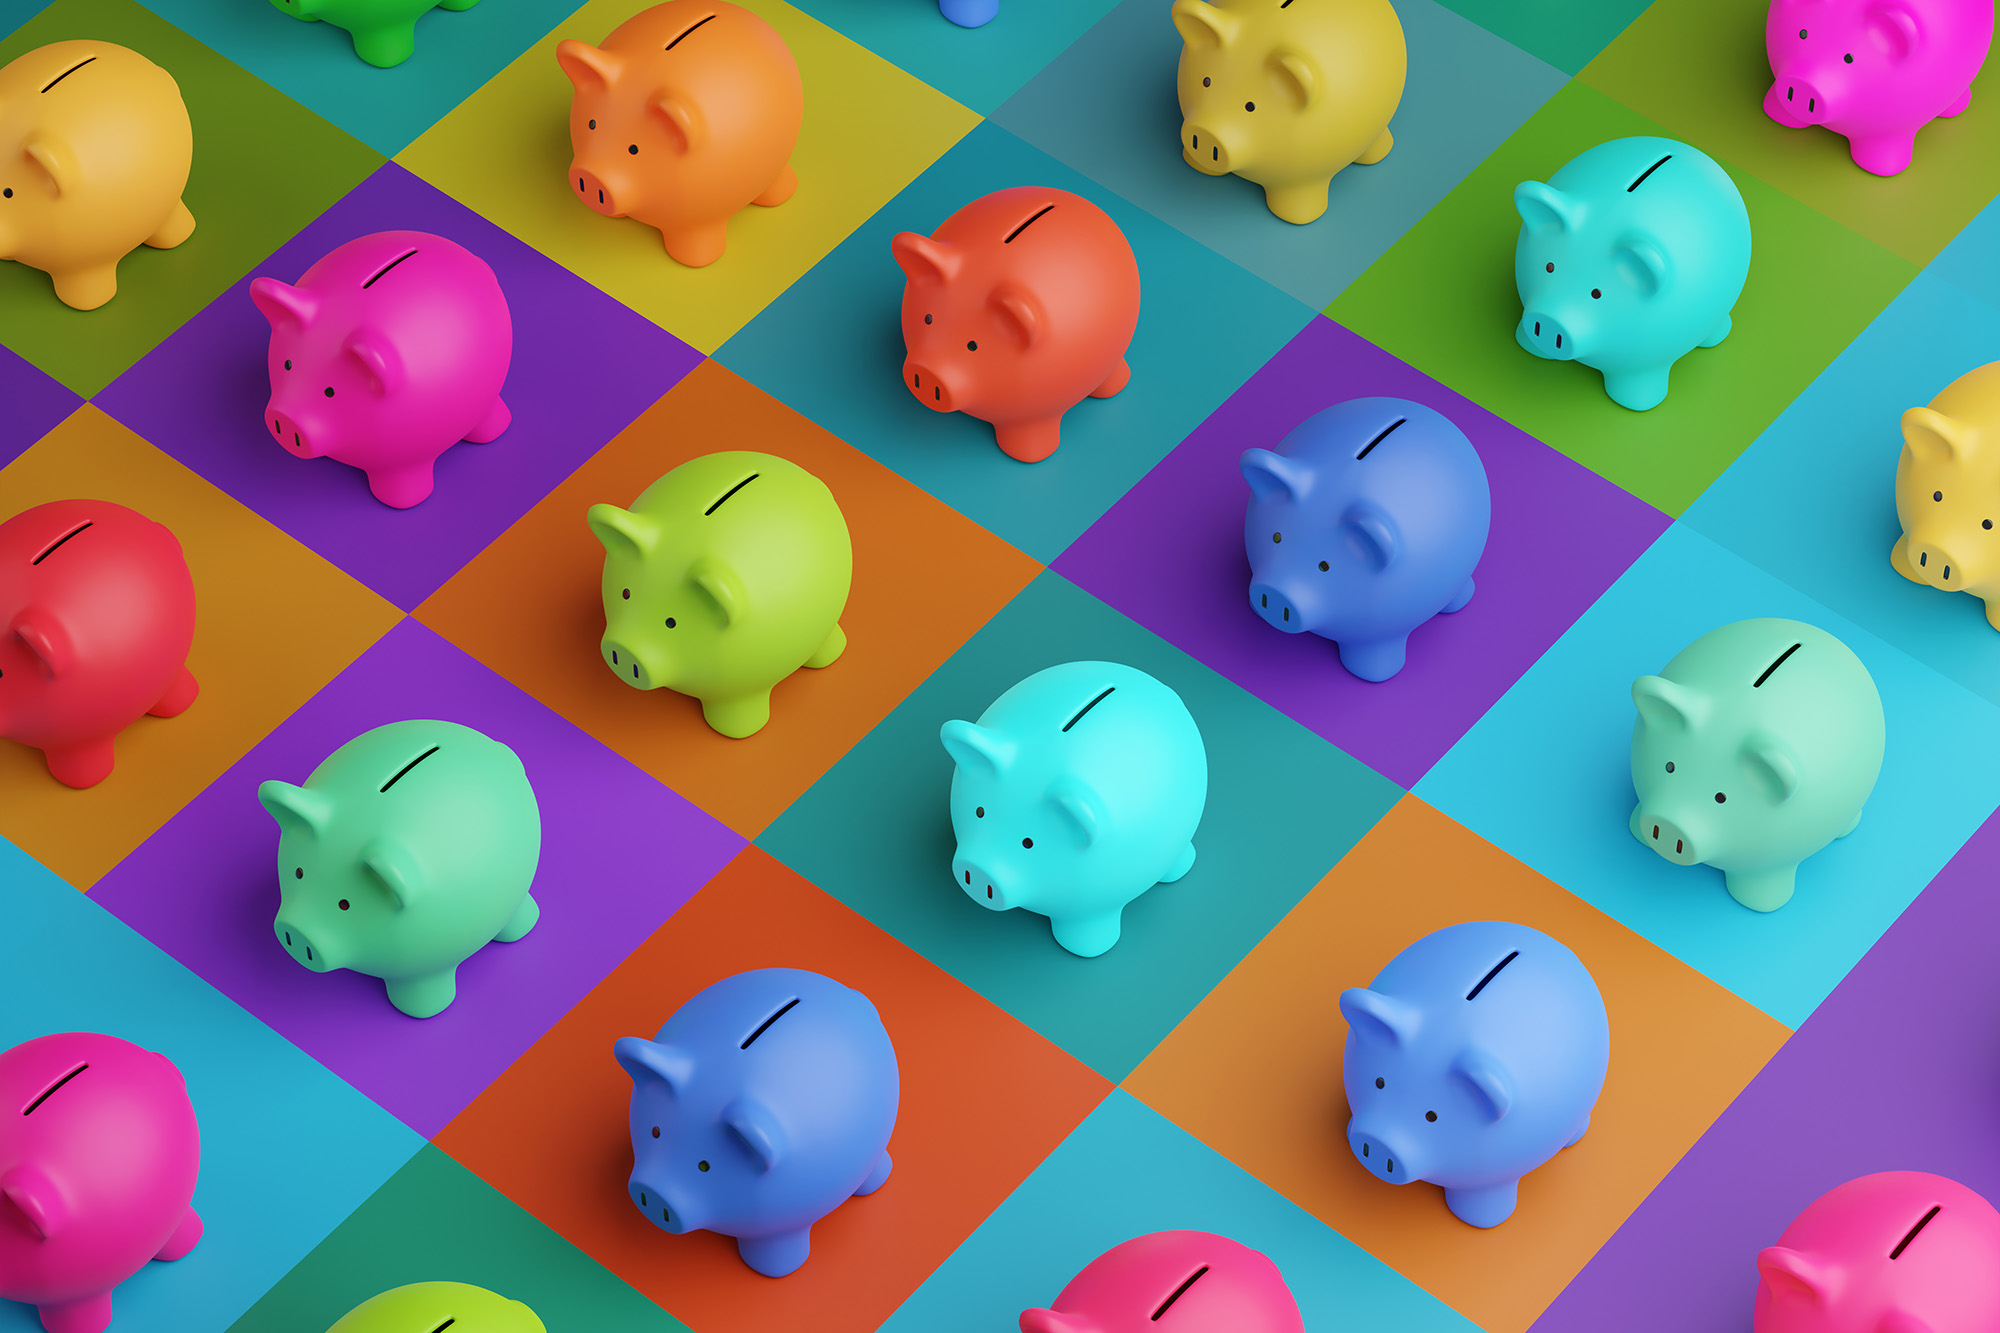 Array of piggy banks in saturated colors on high color contrast background.